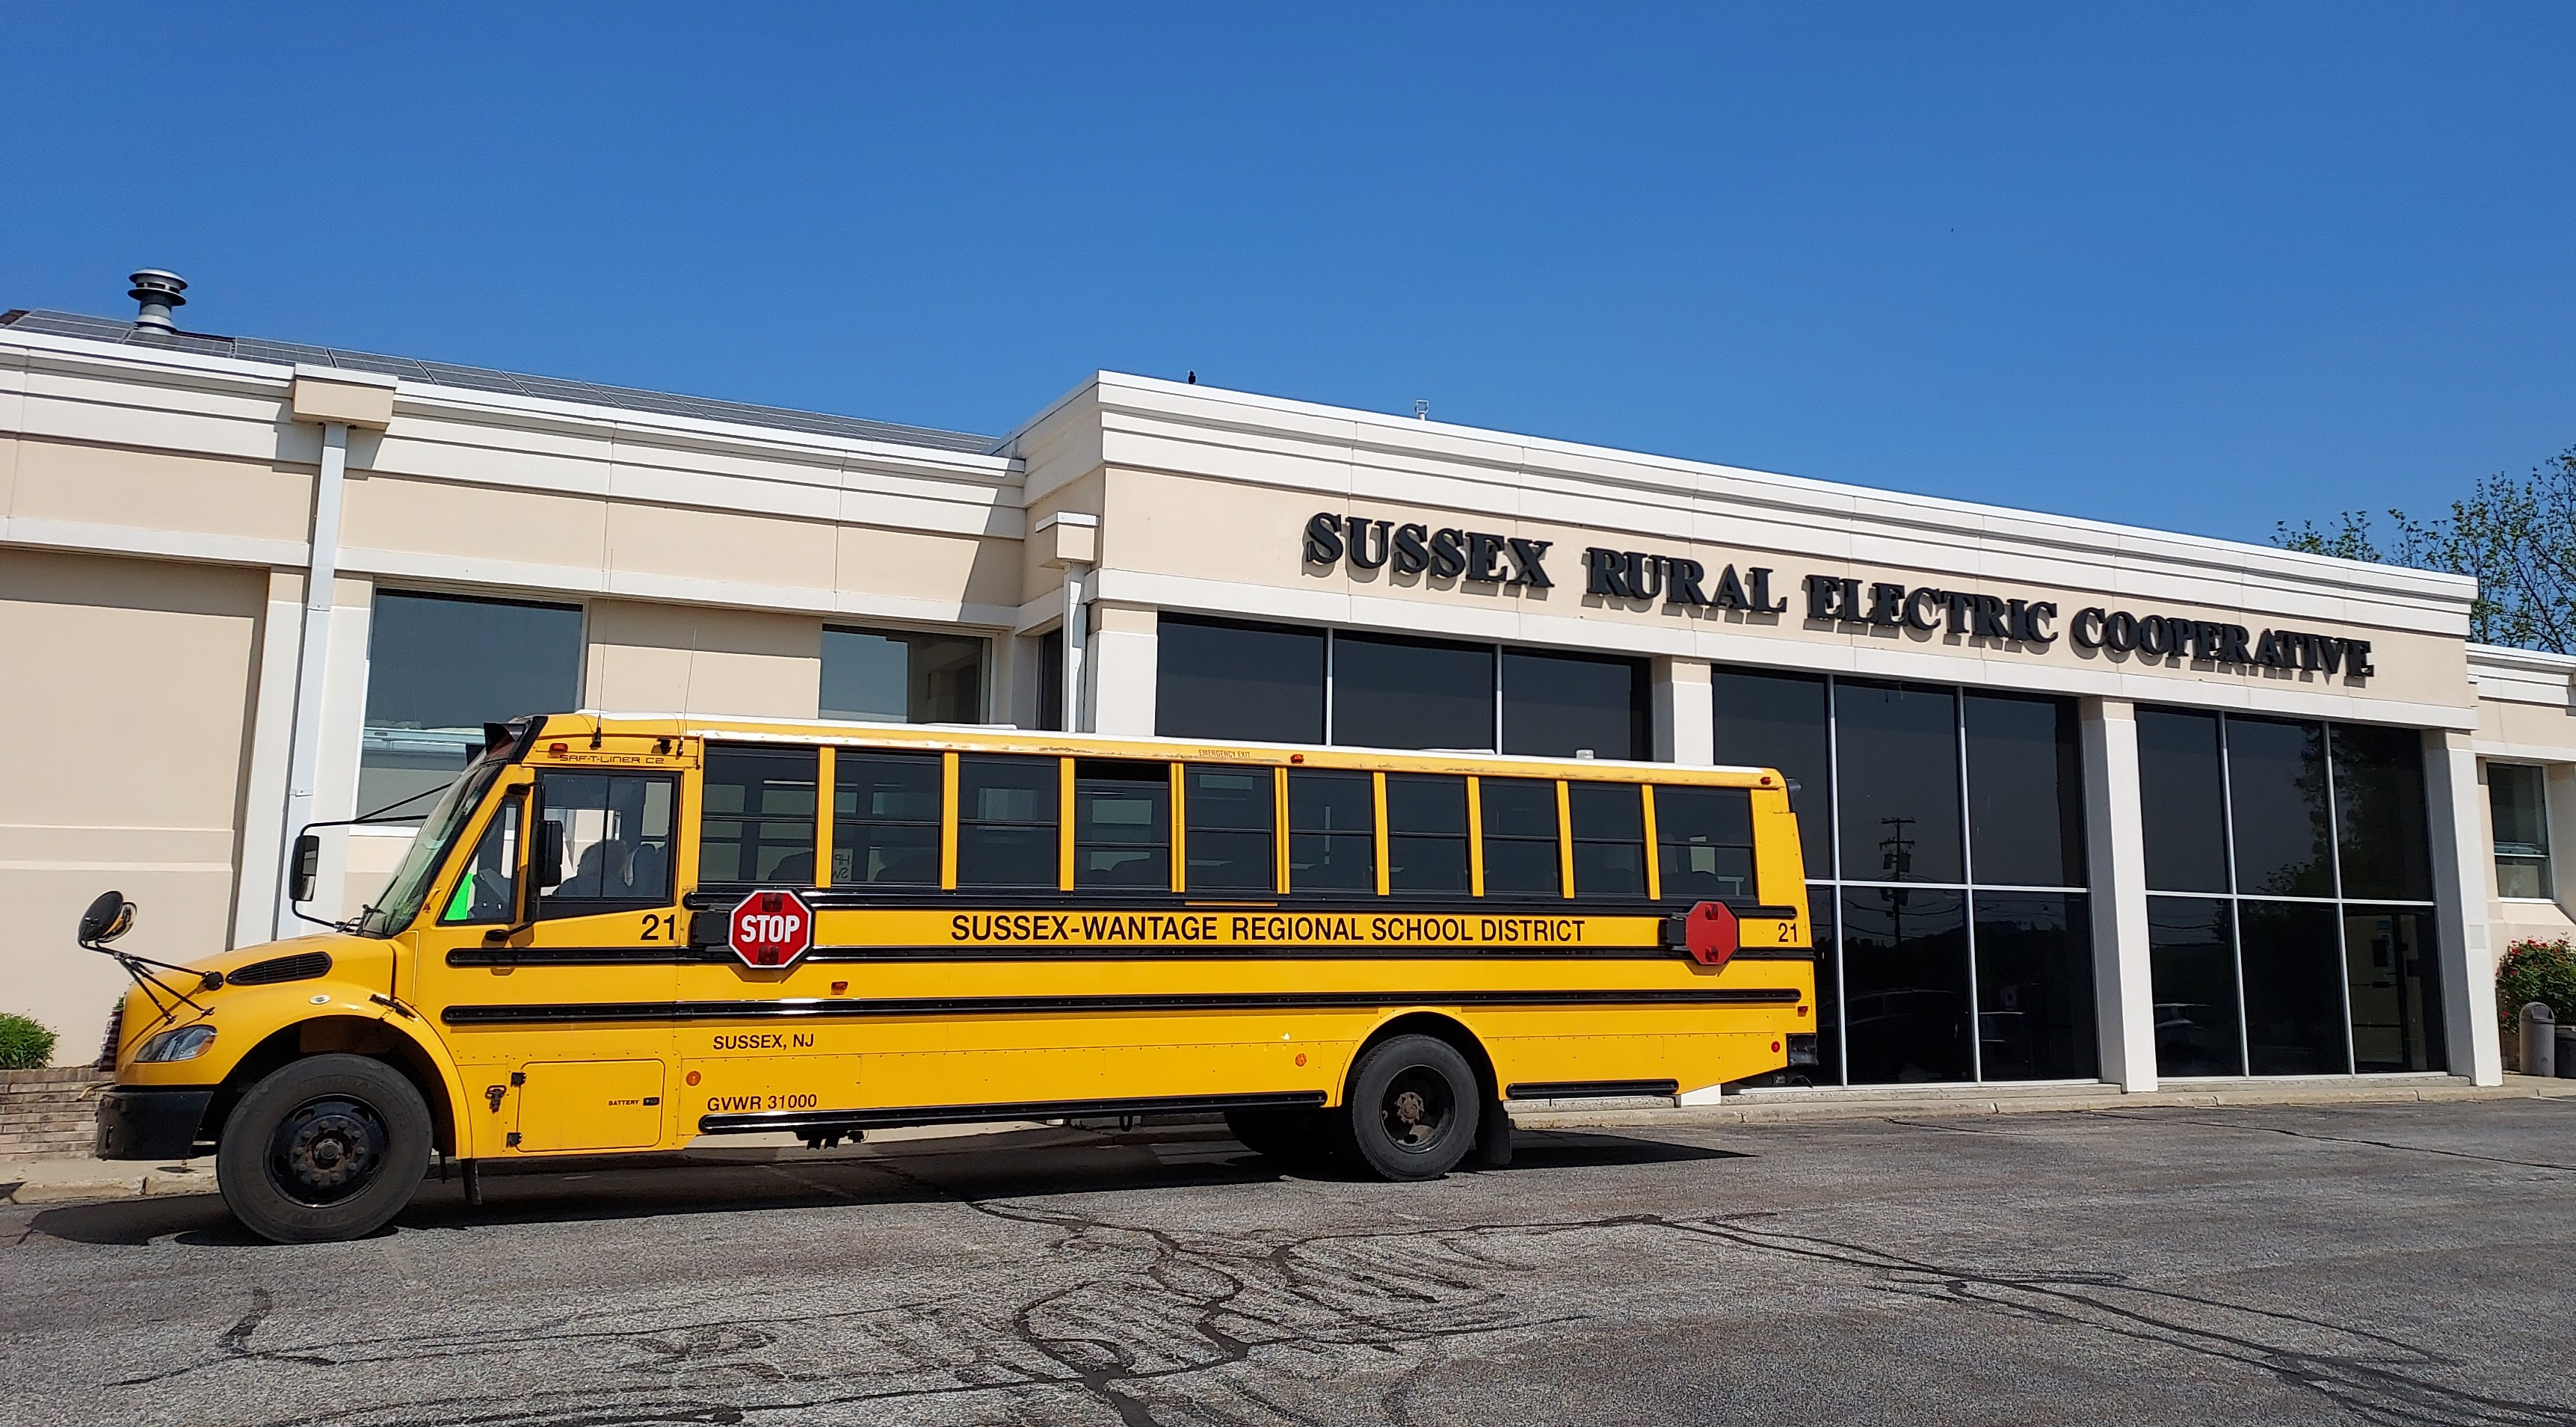 Sussex-Wantage School Bus parked in front of Sussex Rural Electric Cooperative's office for a field trip